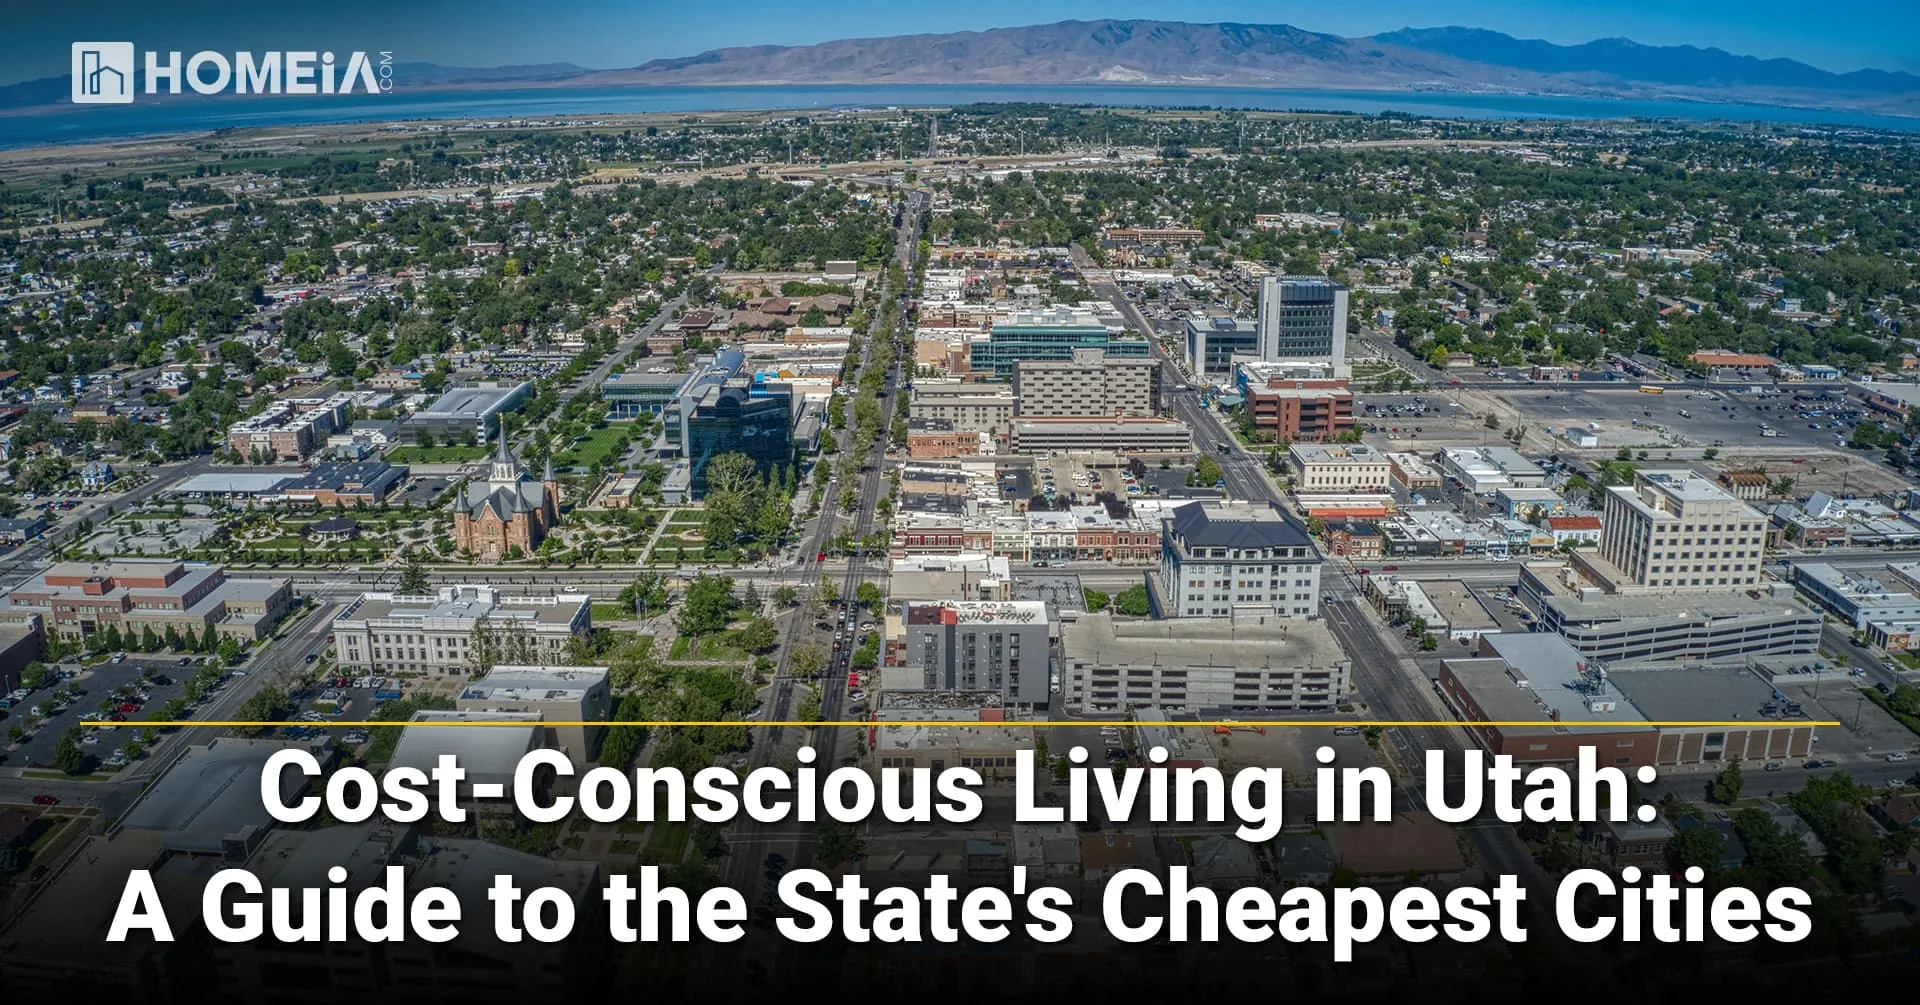 Cost-Conscious Living in Utah: A Guide to the State's Cheapest Cities